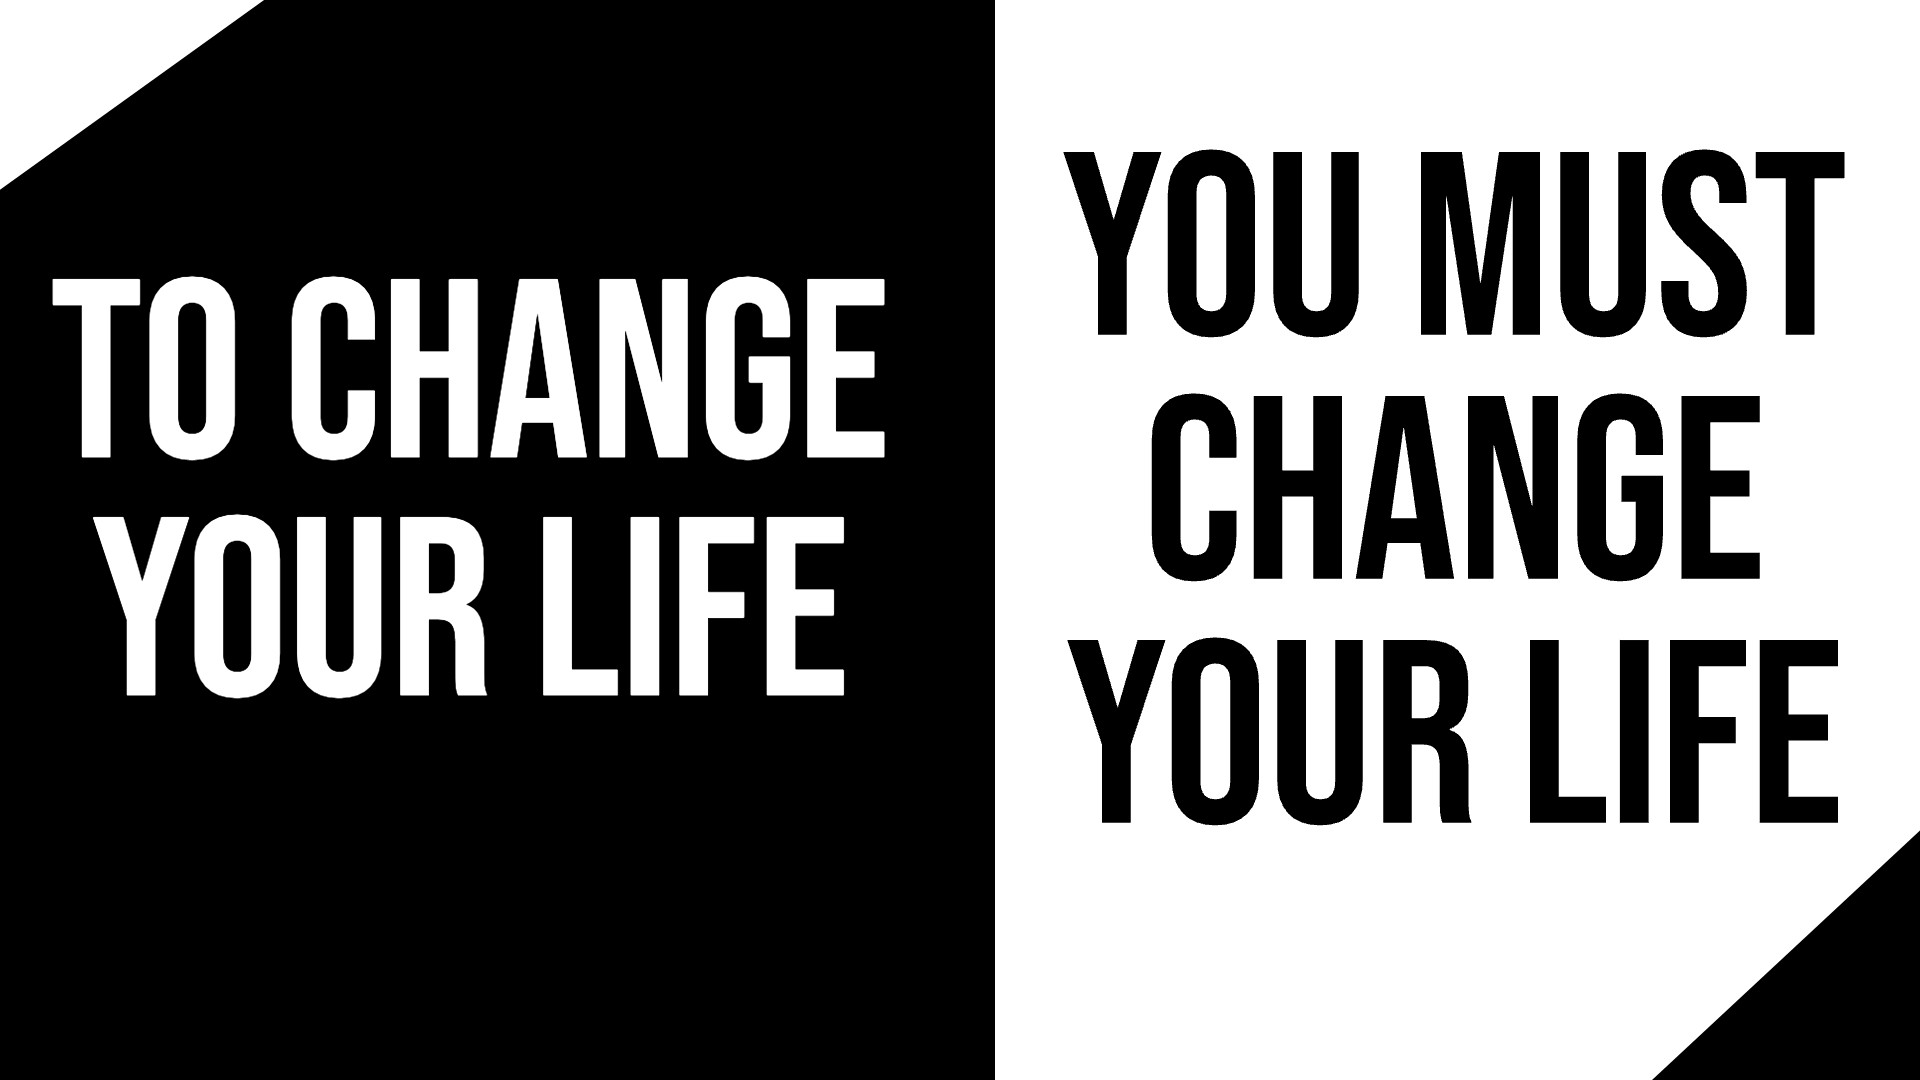 To Change Your Life: You Must Change Your Life